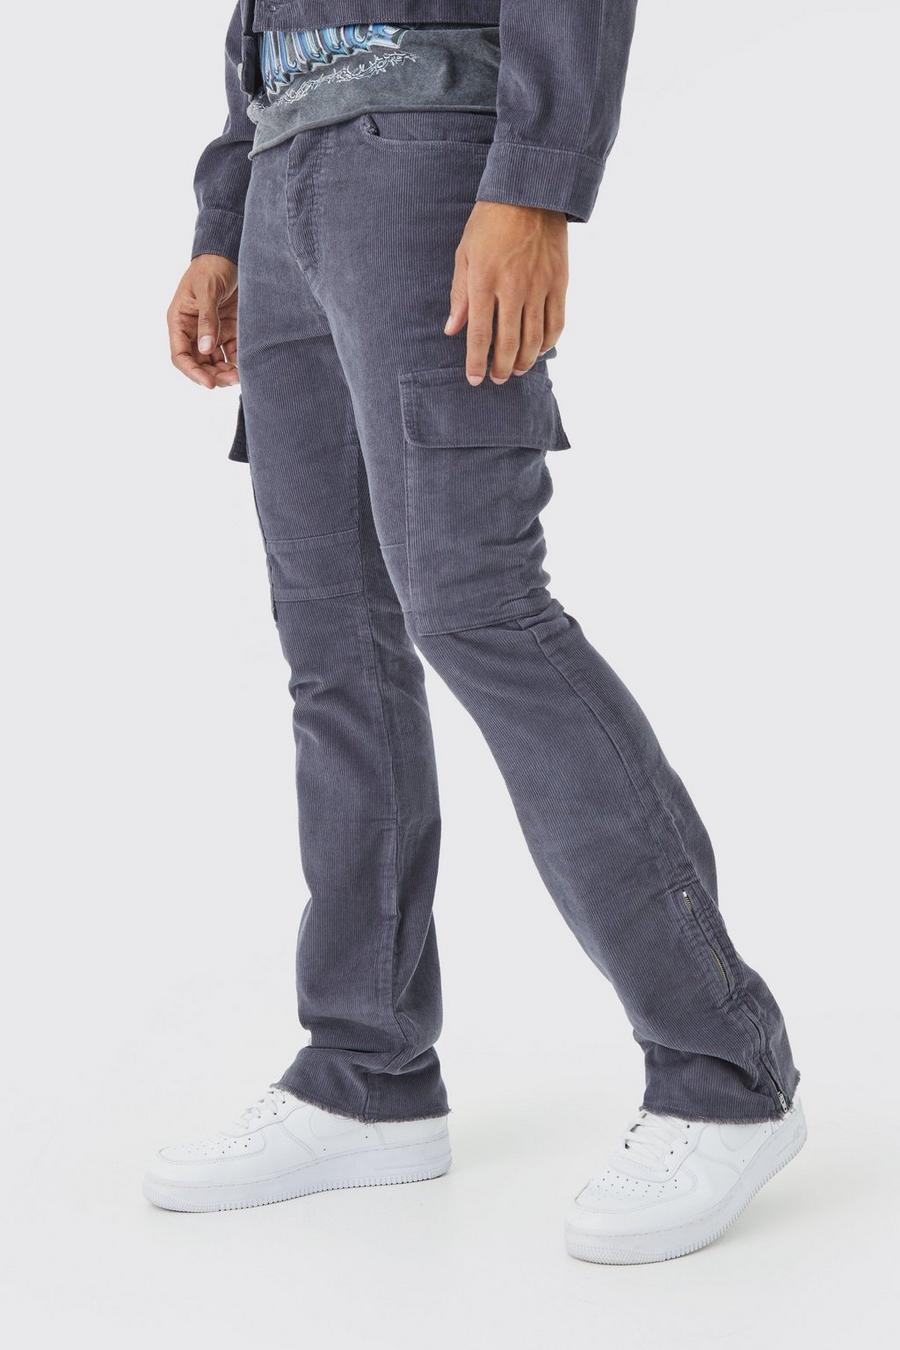 Charcoal gris Fixed Waist Slim Flare Zip Gusset Cord Cargo Trouser